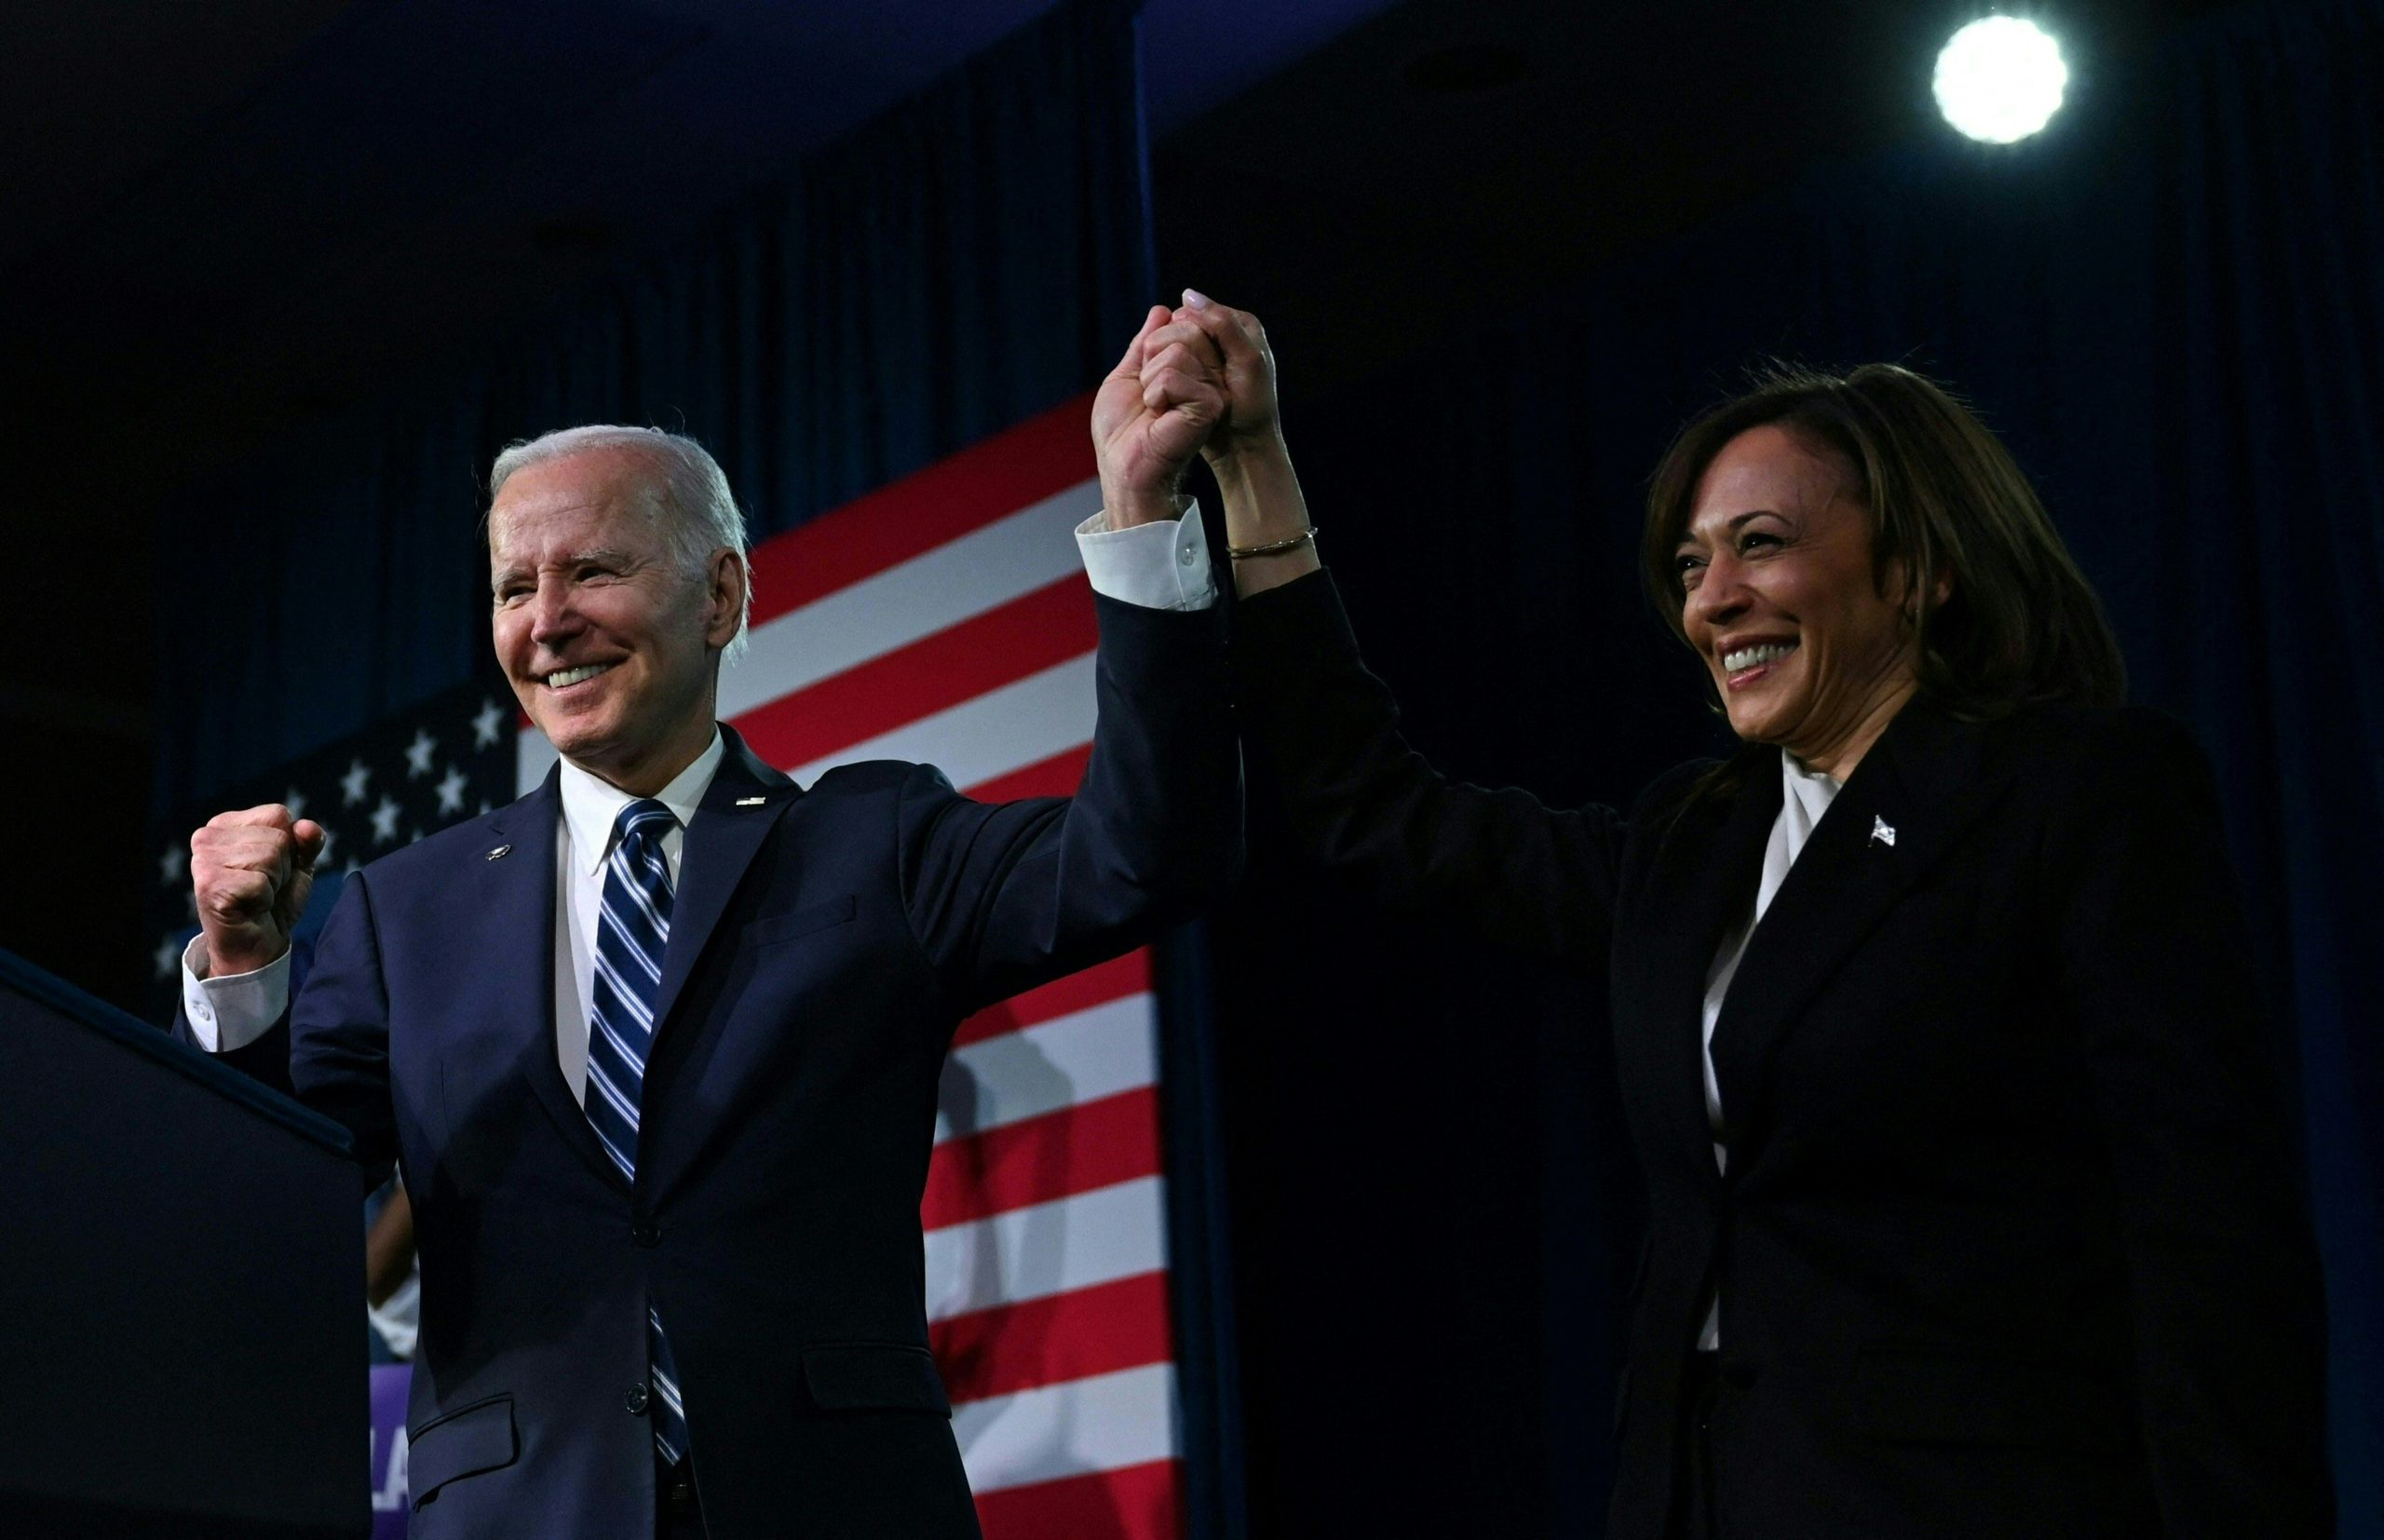 US Vice President Kamala Harris and US President Joe Biden hold hands at the Democratic National Committee (DNC) 2023 Winter meeting in Philadelphia, Pennsylvania, on February 3, 2023. - The DNC on February 4, 2023, is expected to approve a new lineup for the partys presidential primaries. (Photo by ANDREW CABALLERO-REYNOLDS / AFP) (Photo by ANDREW CABALLERO-REYNOLDS/AFP via Getty Images) 